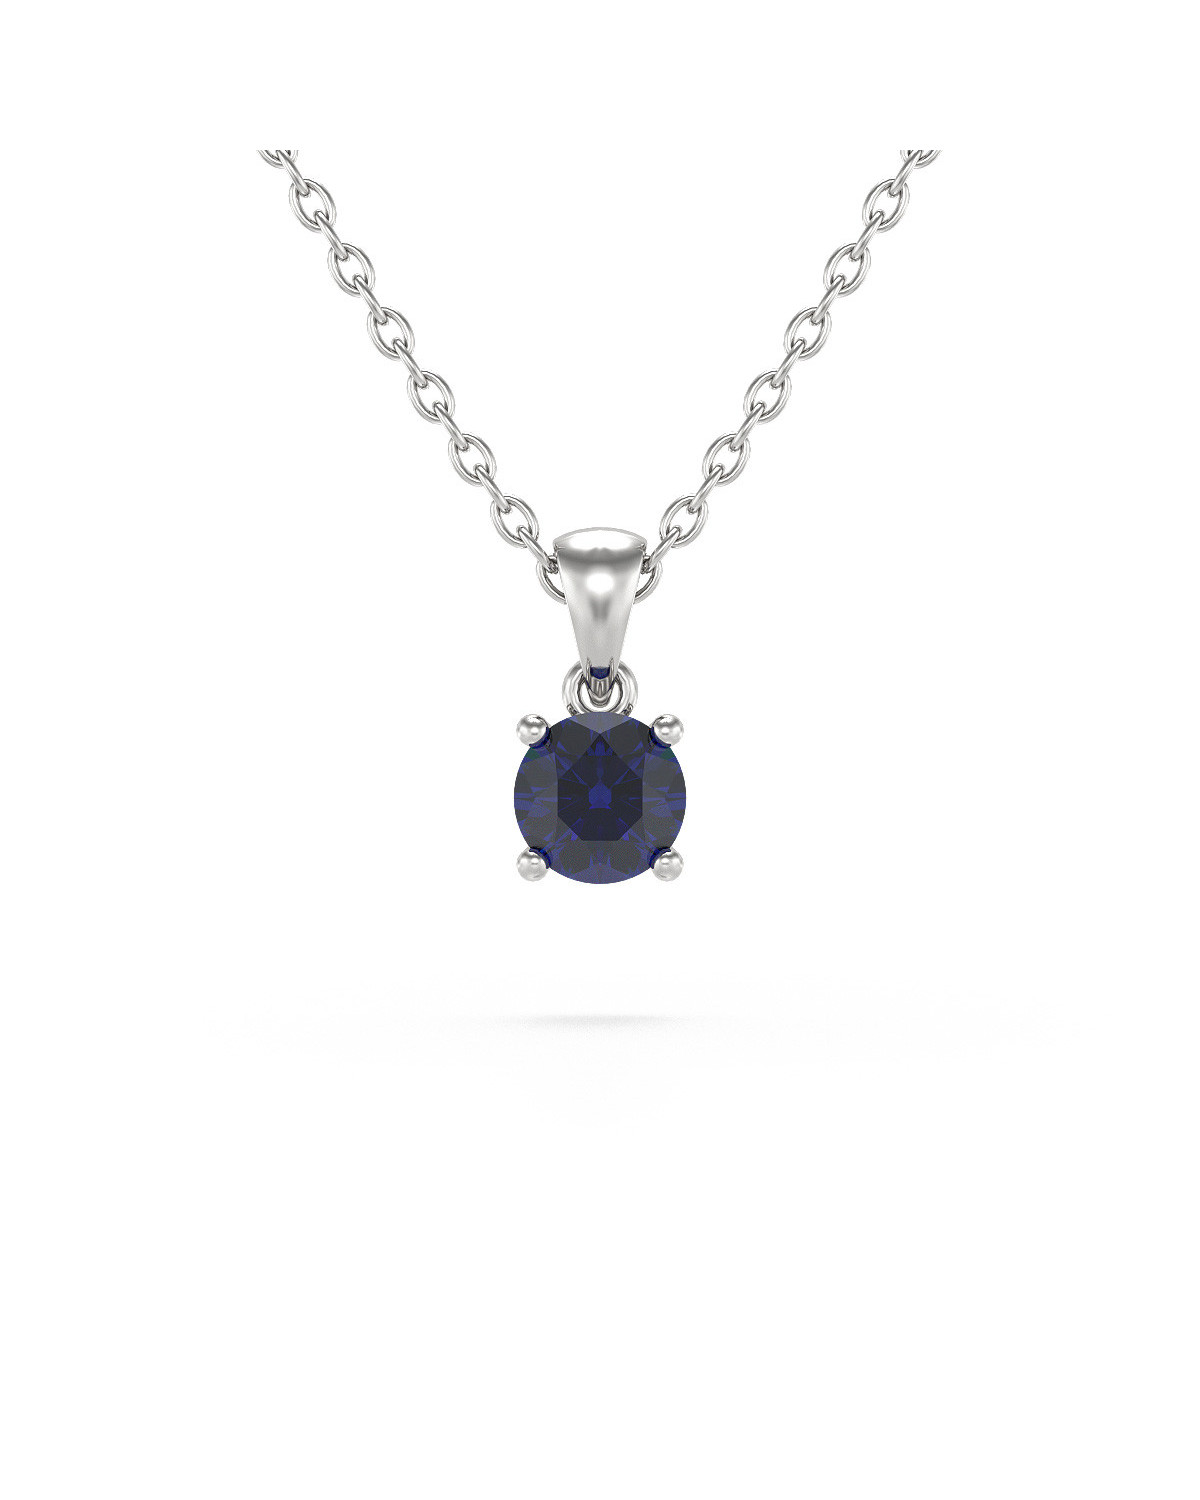 14K Gold Sapphire Necklace Pendant Gold Chain included